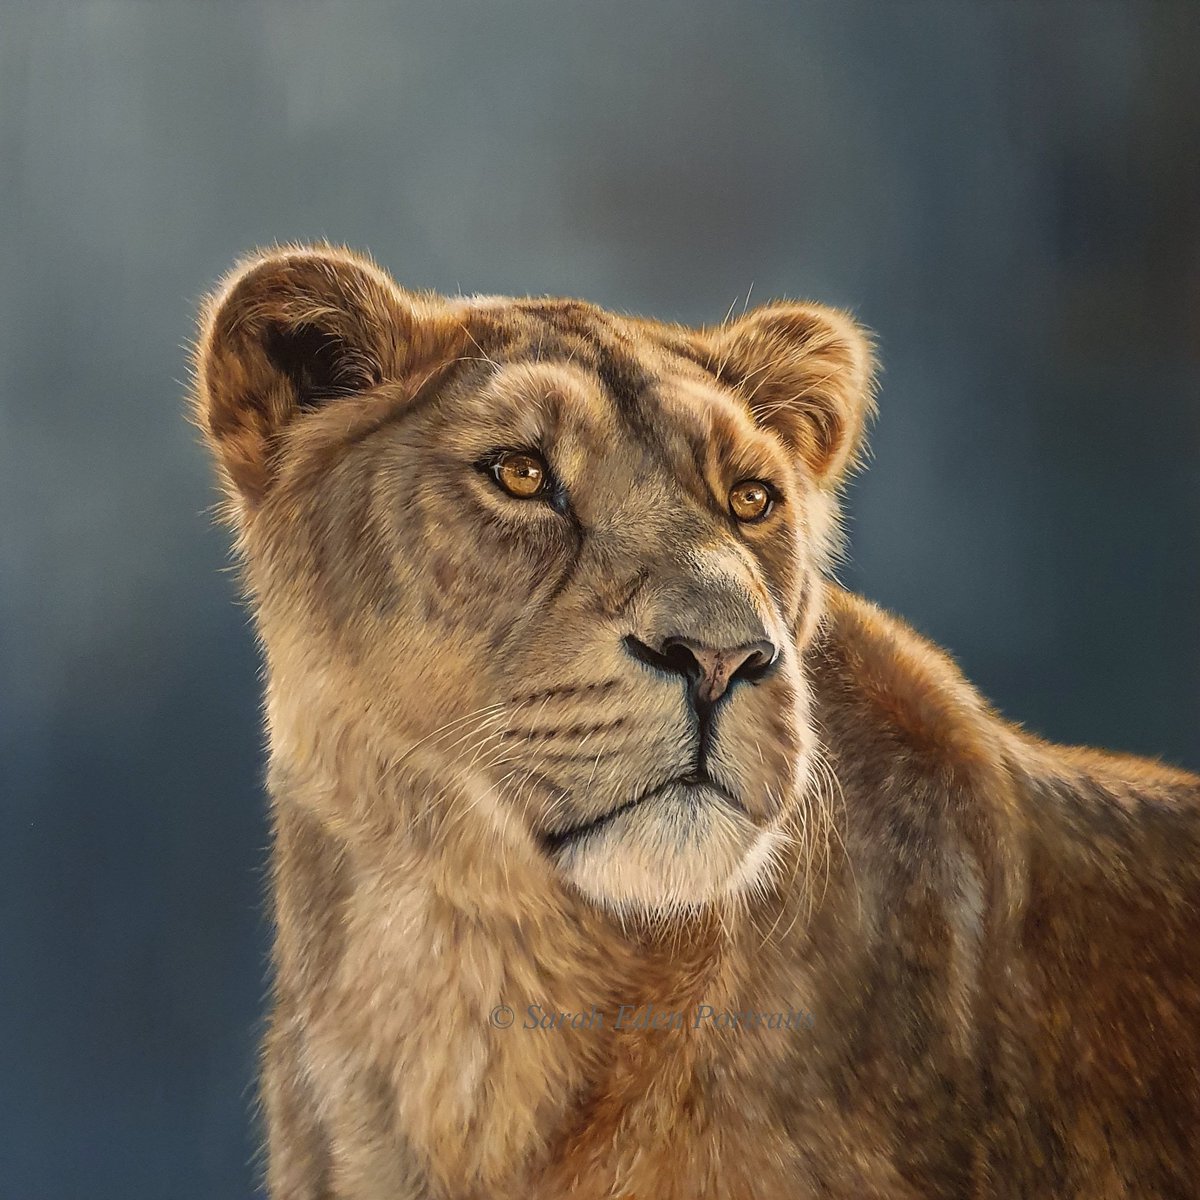 Finished this painting exactly a year ago. I think it's time to move onto my next wildlife piece.... this time I'm going to try my hand at primates. Watch this space 🦍🦍🦍

#lioness #lionesses #lioness #bigcat #bigcat #lionpainting #artforsale #buyart #originalart #oilpainting